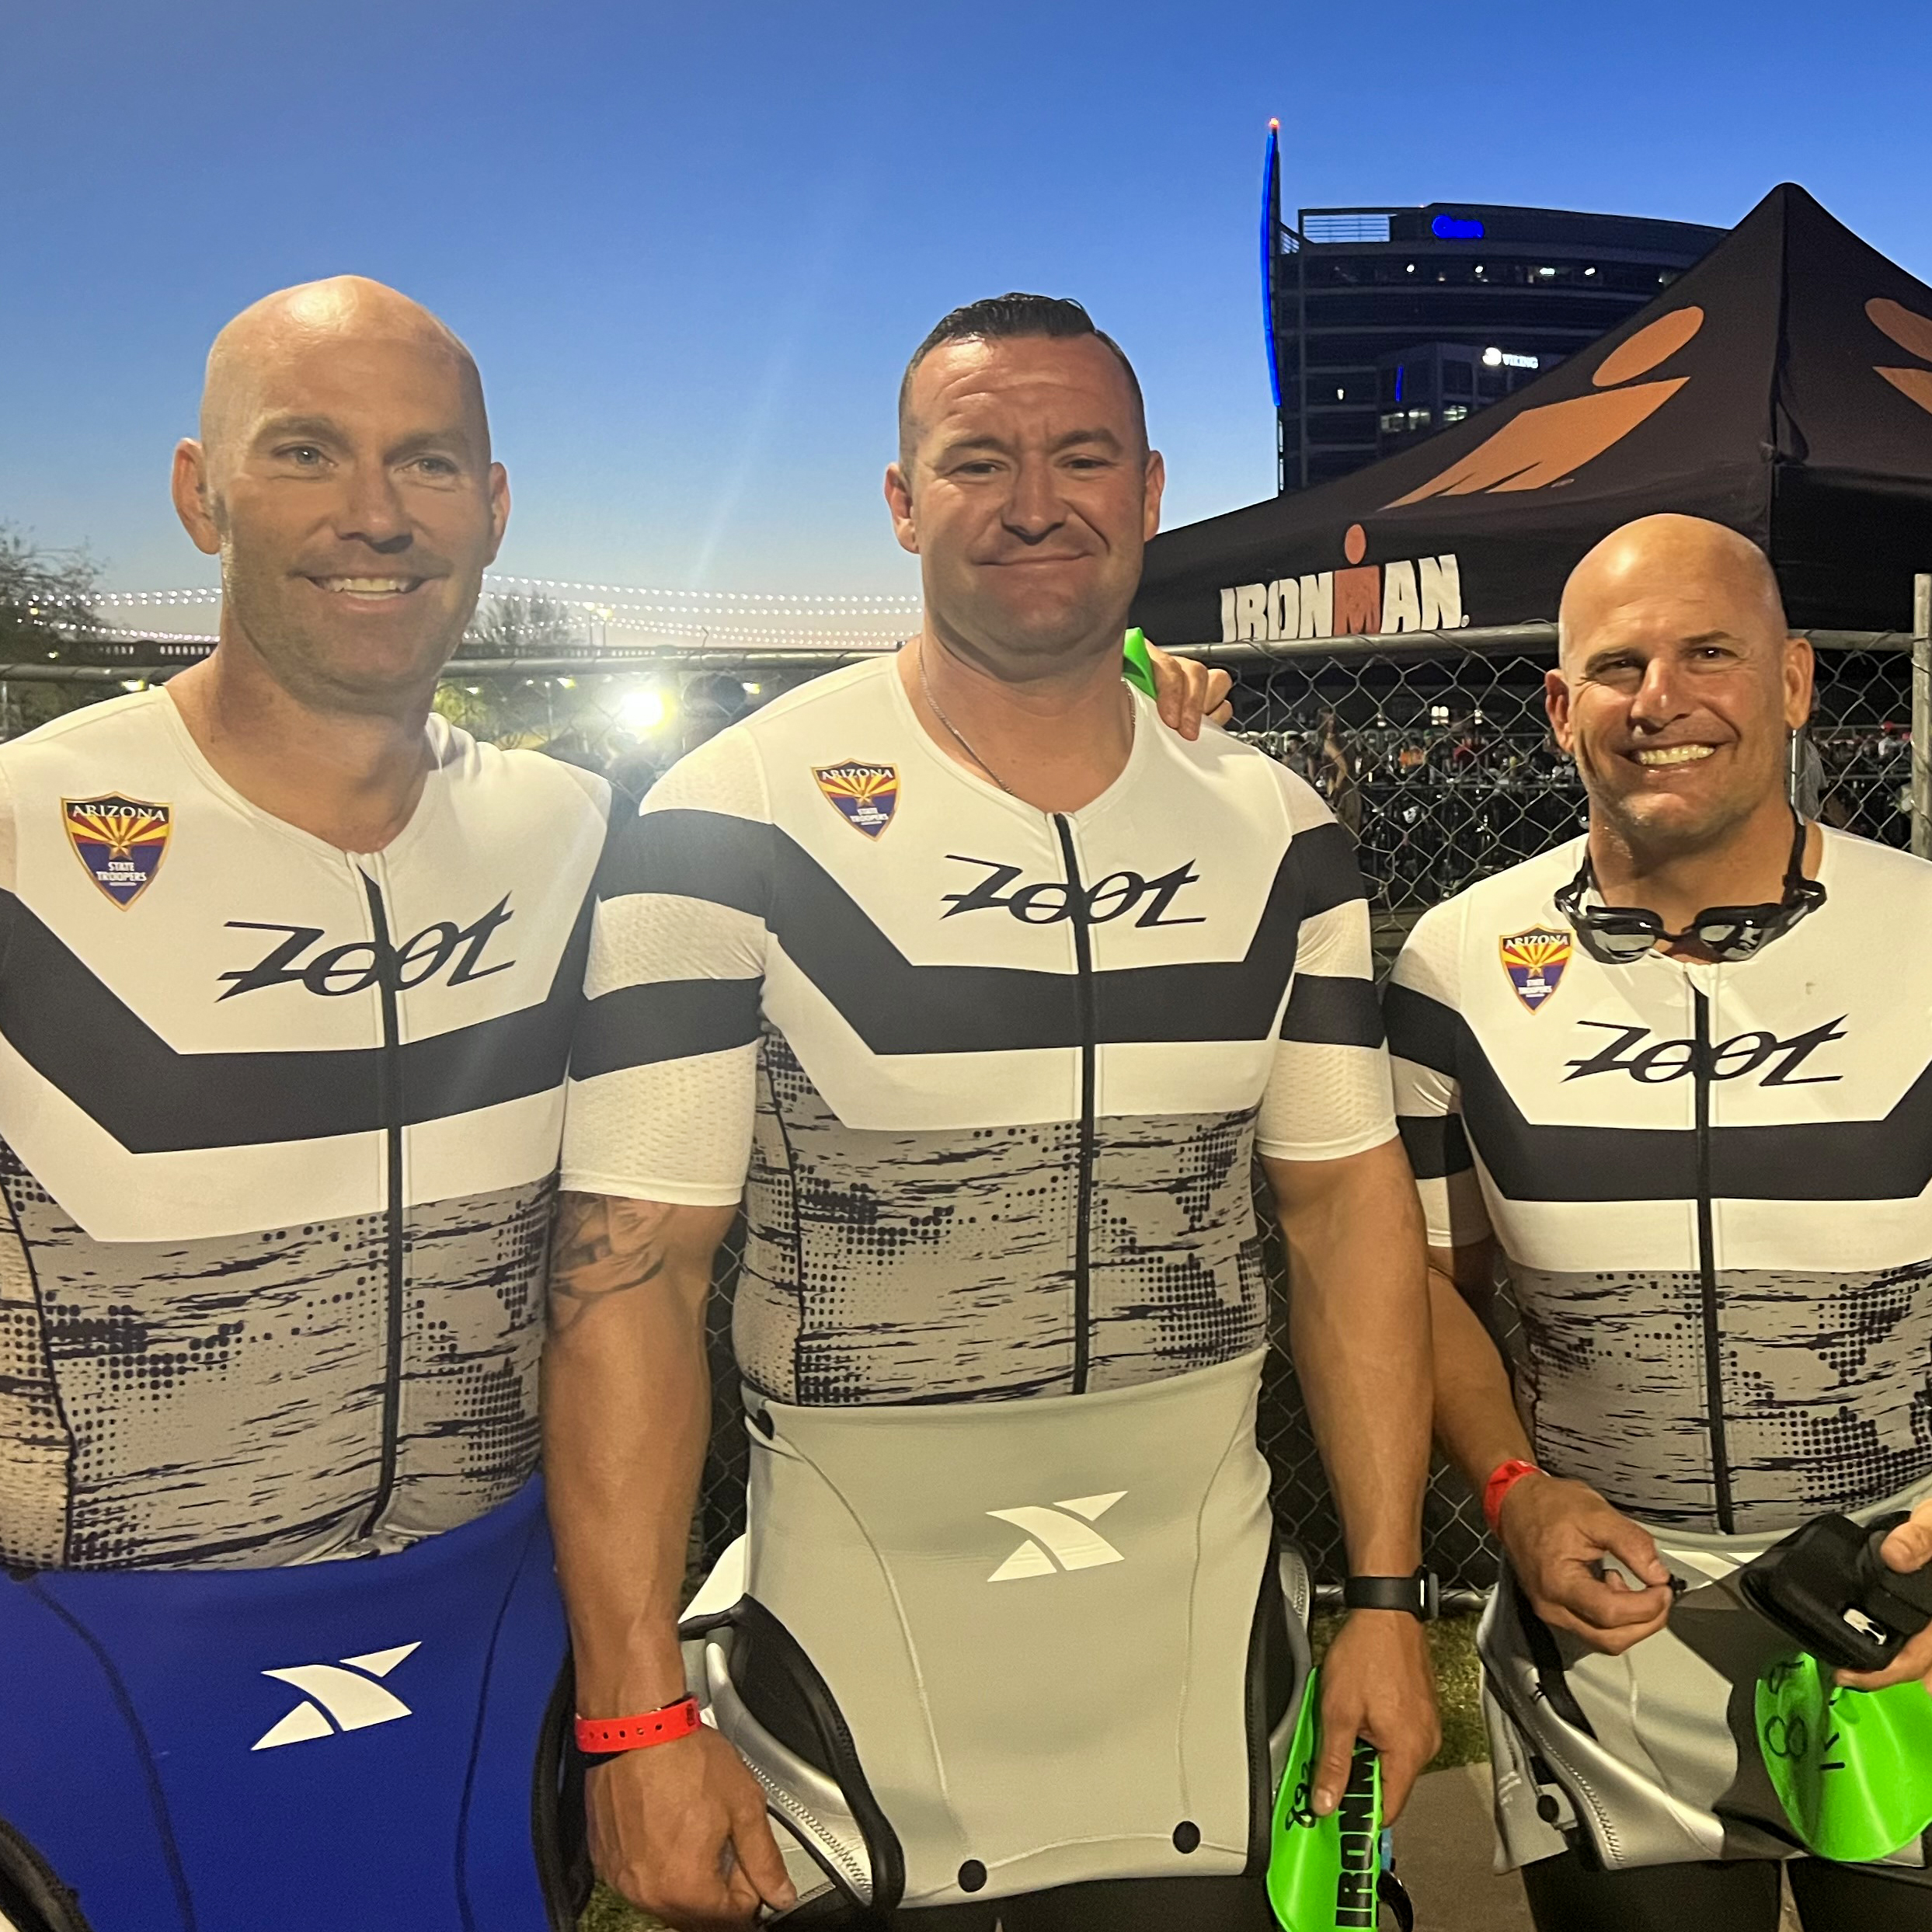 Sergeant Coughlin, Sergeant Covert and Sergeant Christie at the Ironman 70.3 Arizona